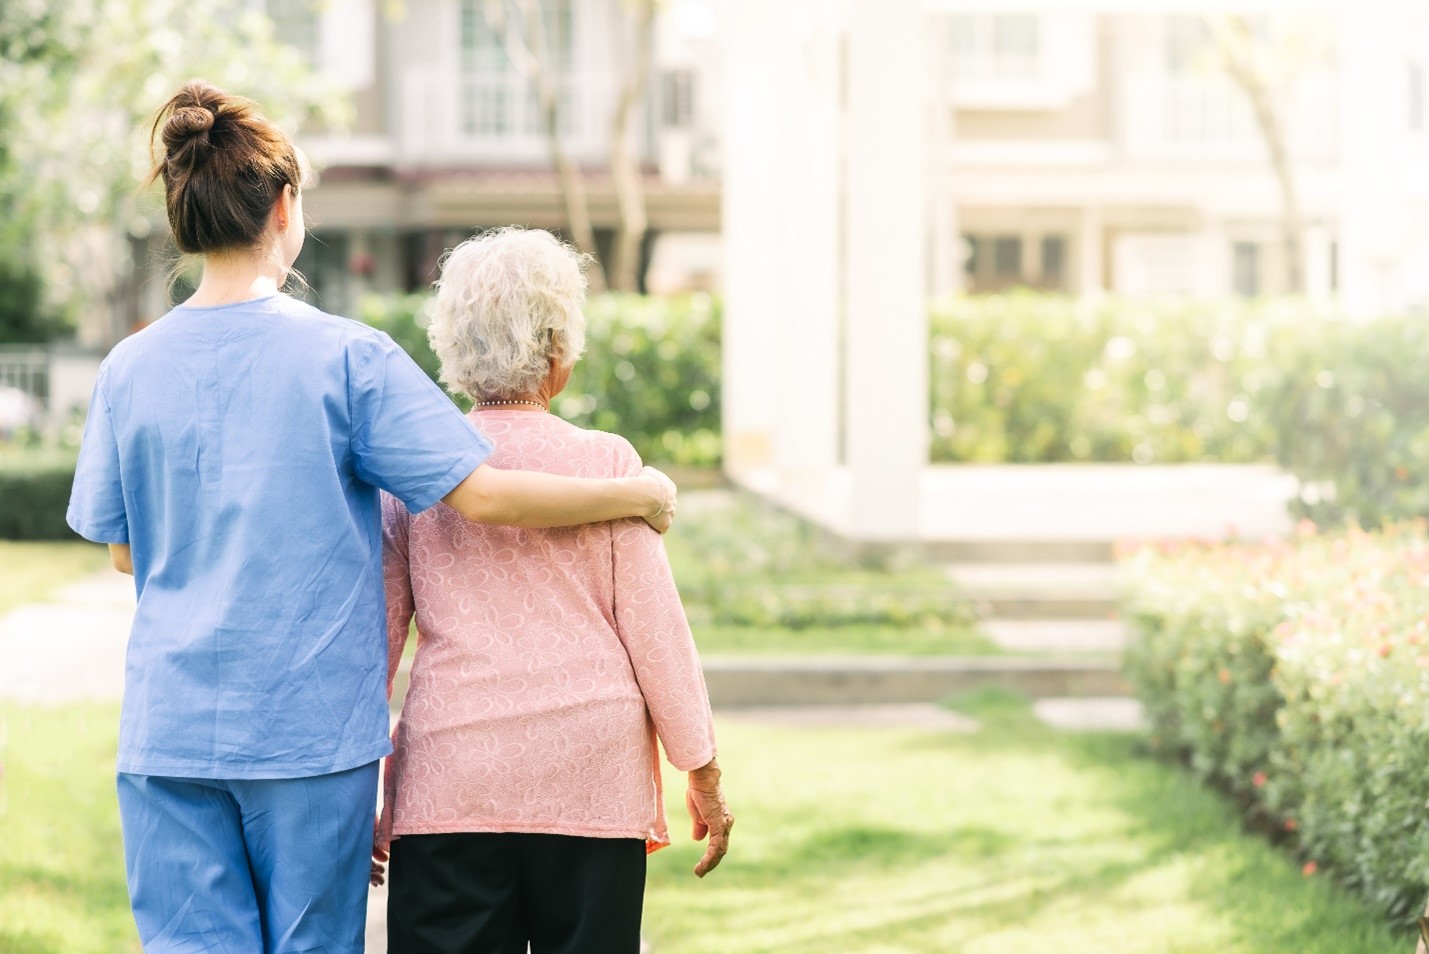 A young woman caregiver in blue scrubs places her arm around an elderly woman as they walk together outside surrounded by greenery.